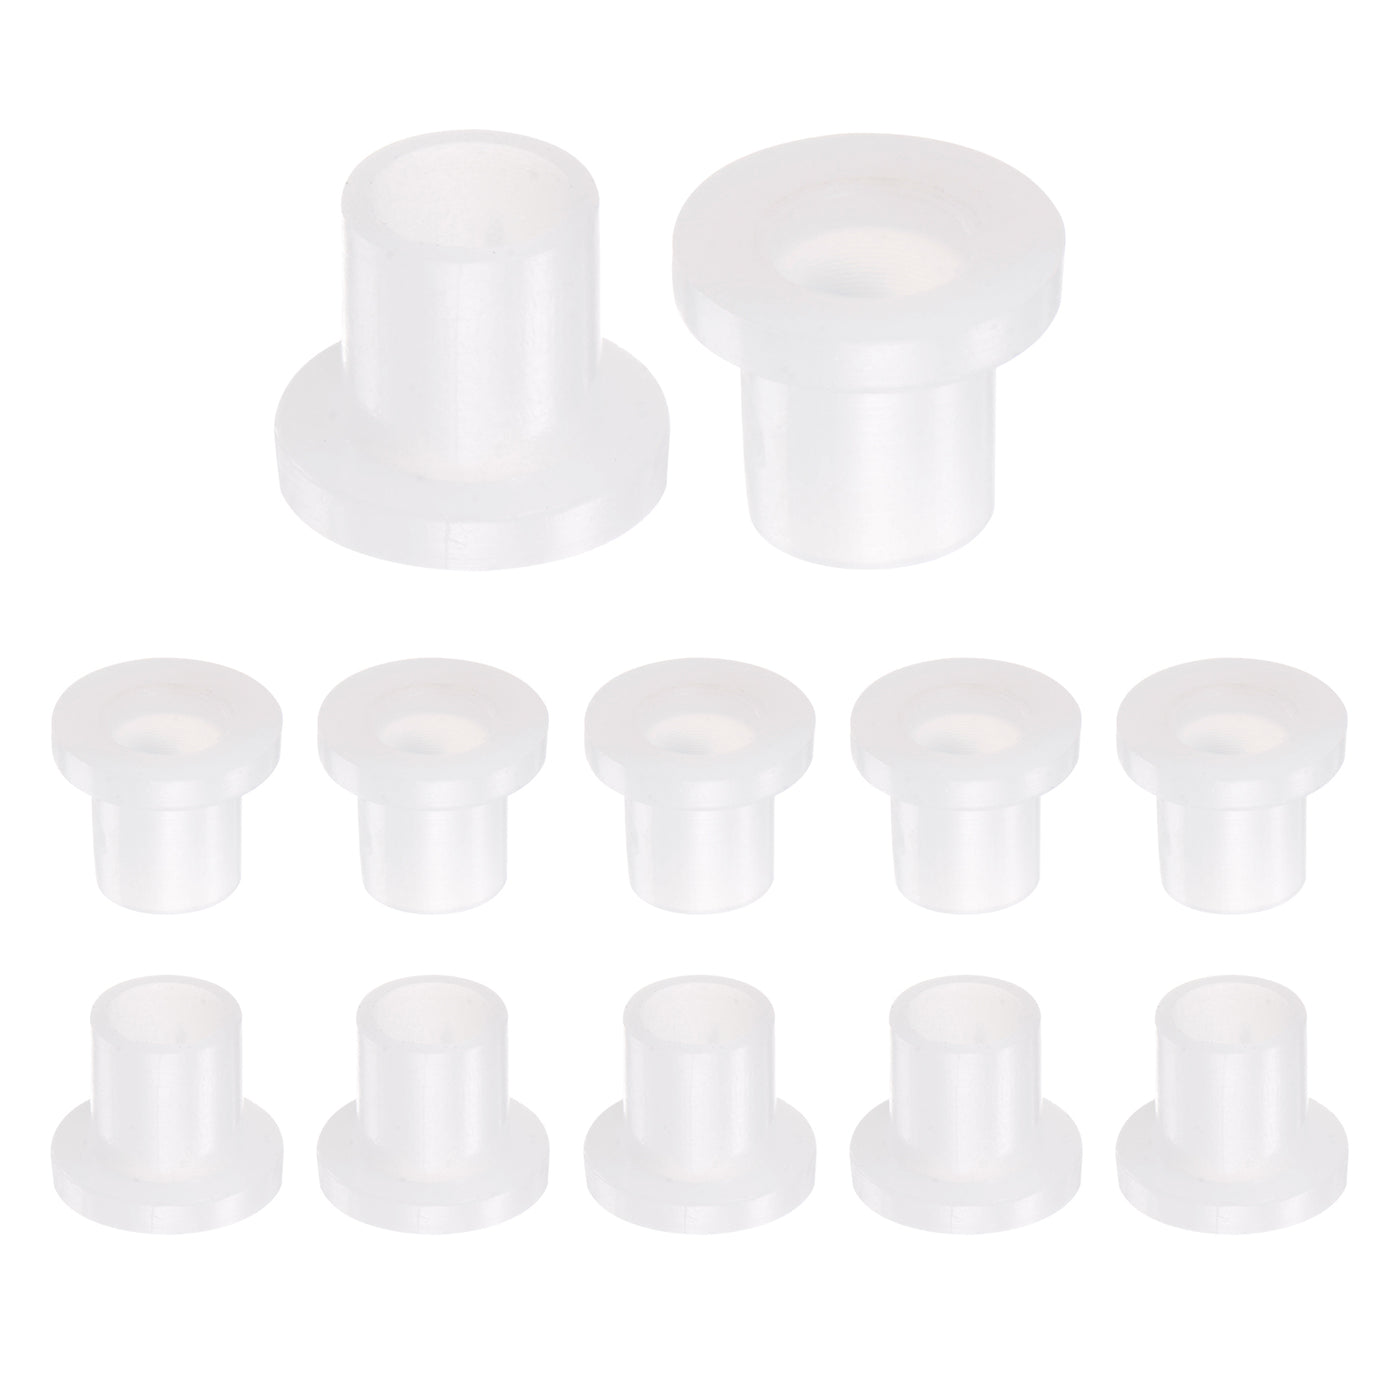 uxcell Uxcell 12pcs Flanged Sleeve Bearings 5mm ID 6.6mm OD 8.1mm Length Nylon Bushings, White